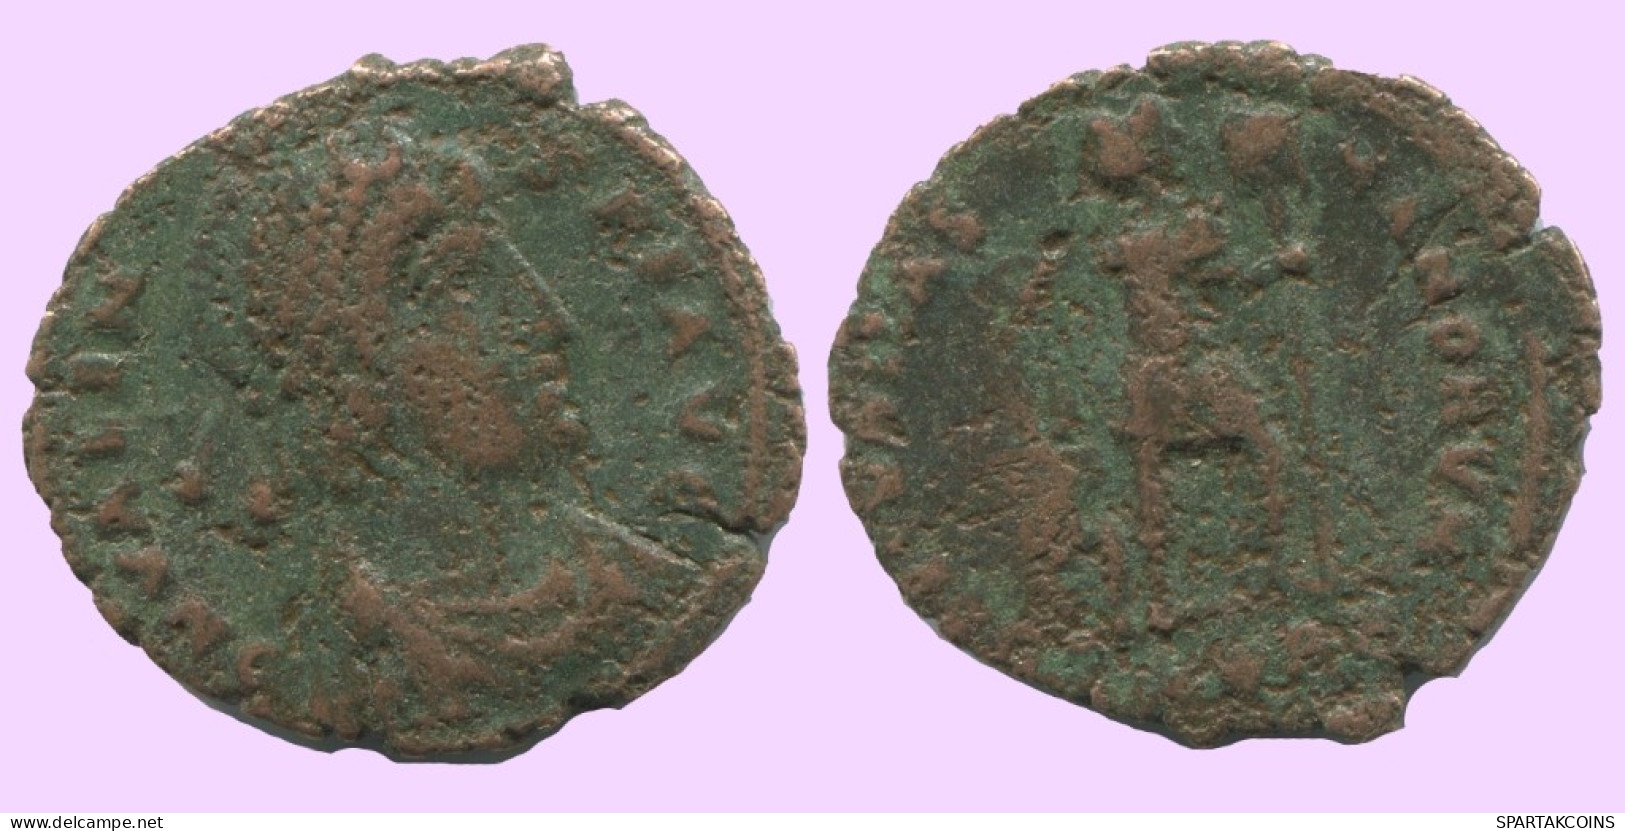 LATE ROMAN EMPIRE Follis Antique Authentique Roman Pièce 2.3g/19mm #ANT1970.7.F.A - The End Of Empire (363 AD To 476 AD)